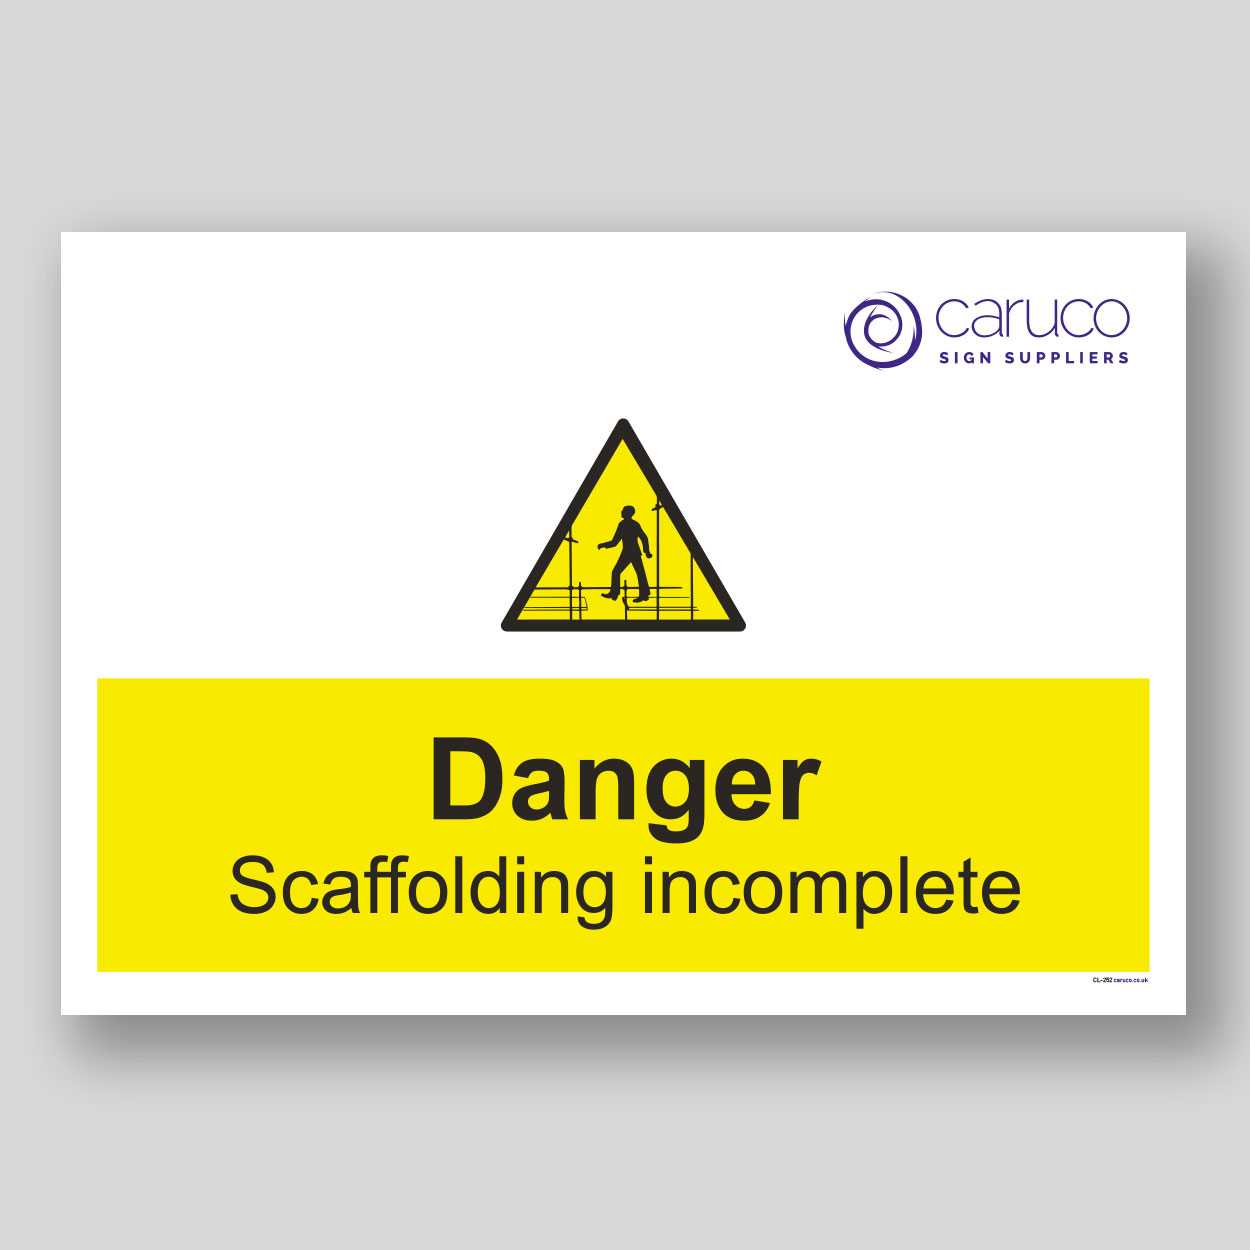 CL-252 Danger - scaffold incomplete